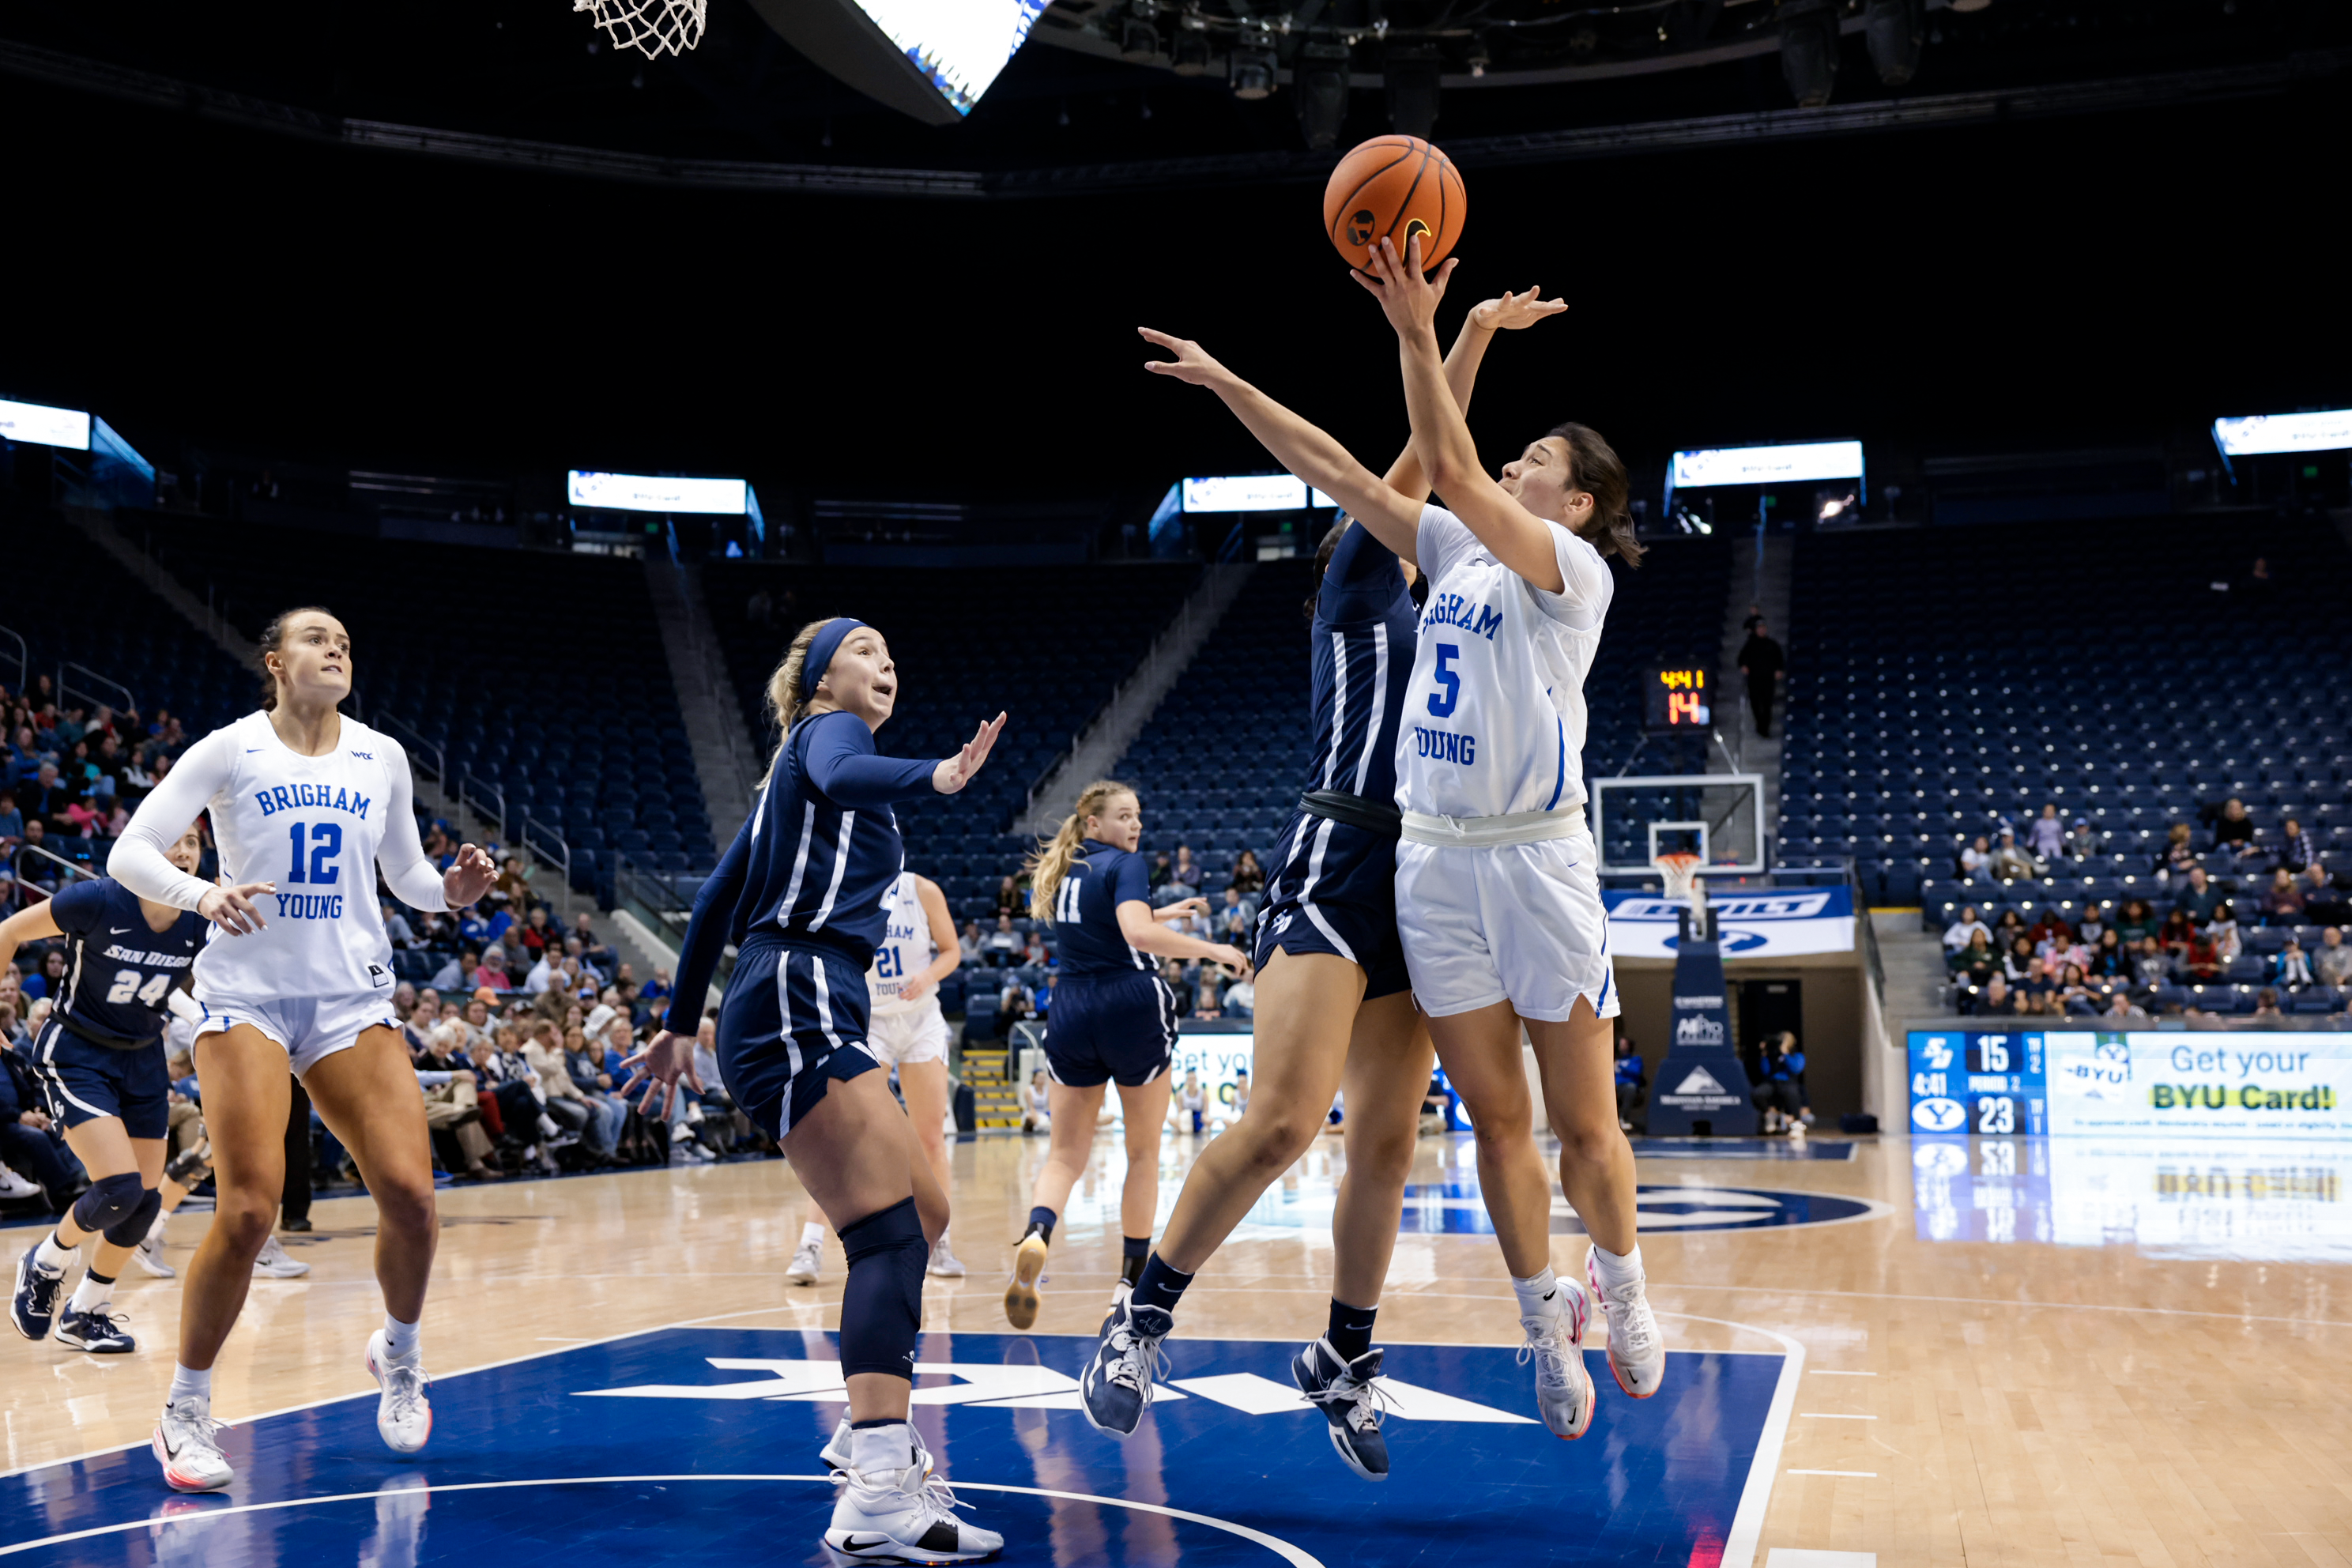 Arielle Mackey-Williams puts up a shot during a 63-49 win over San Diego.